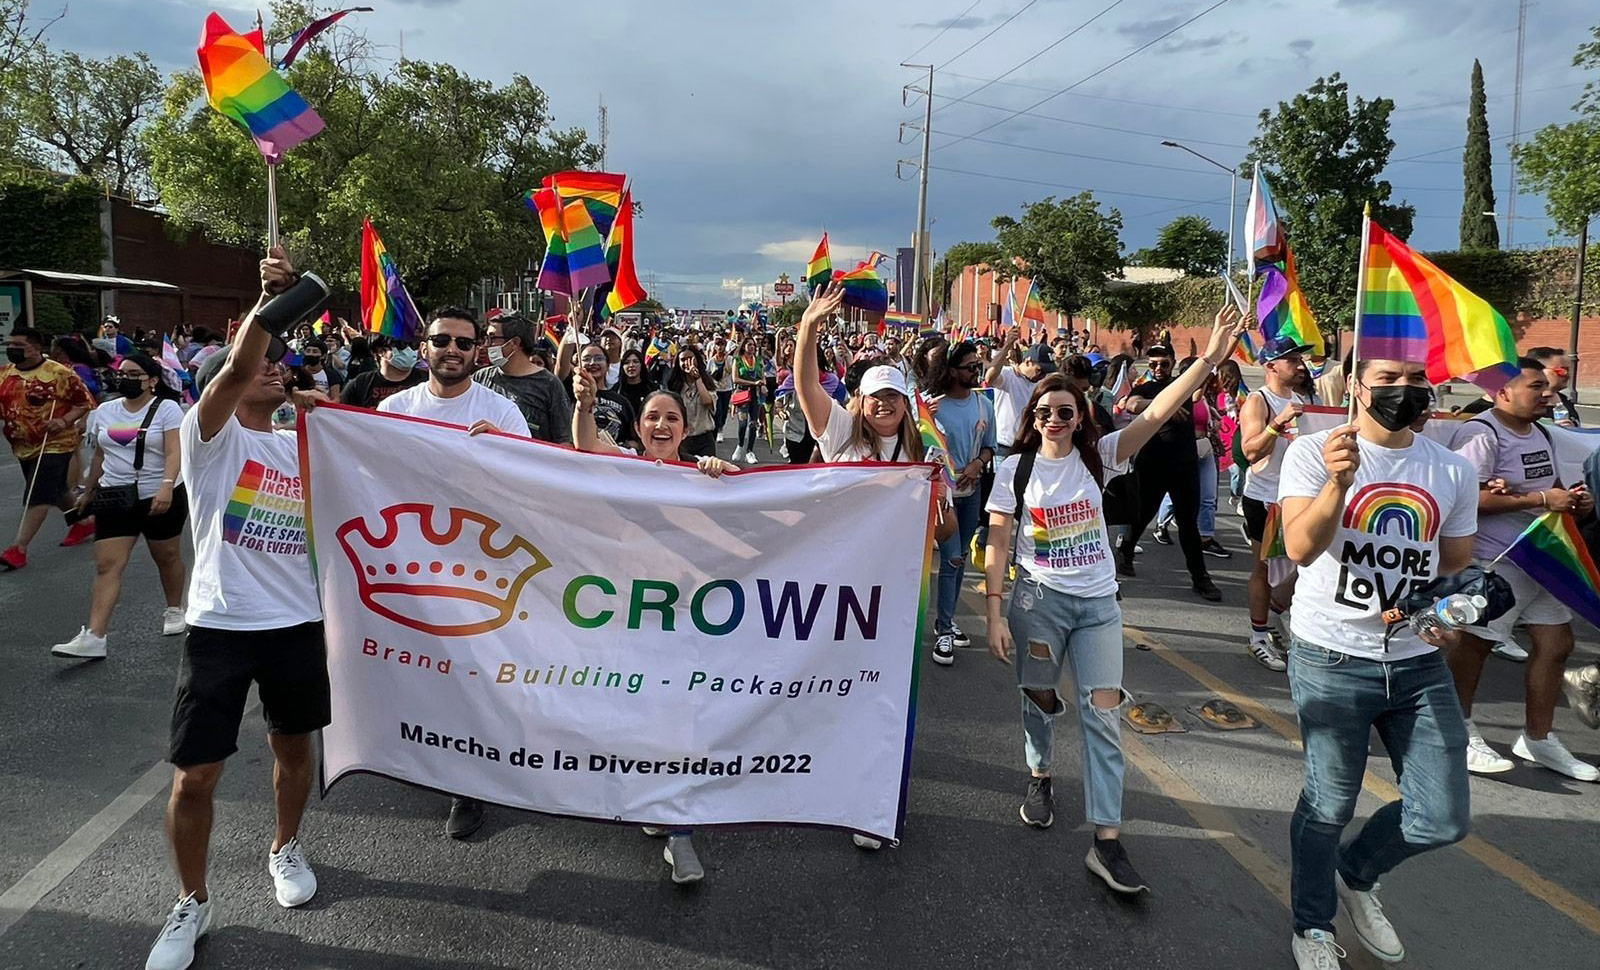 A group of people holding a rainbow Crown logo banner in a pride parade